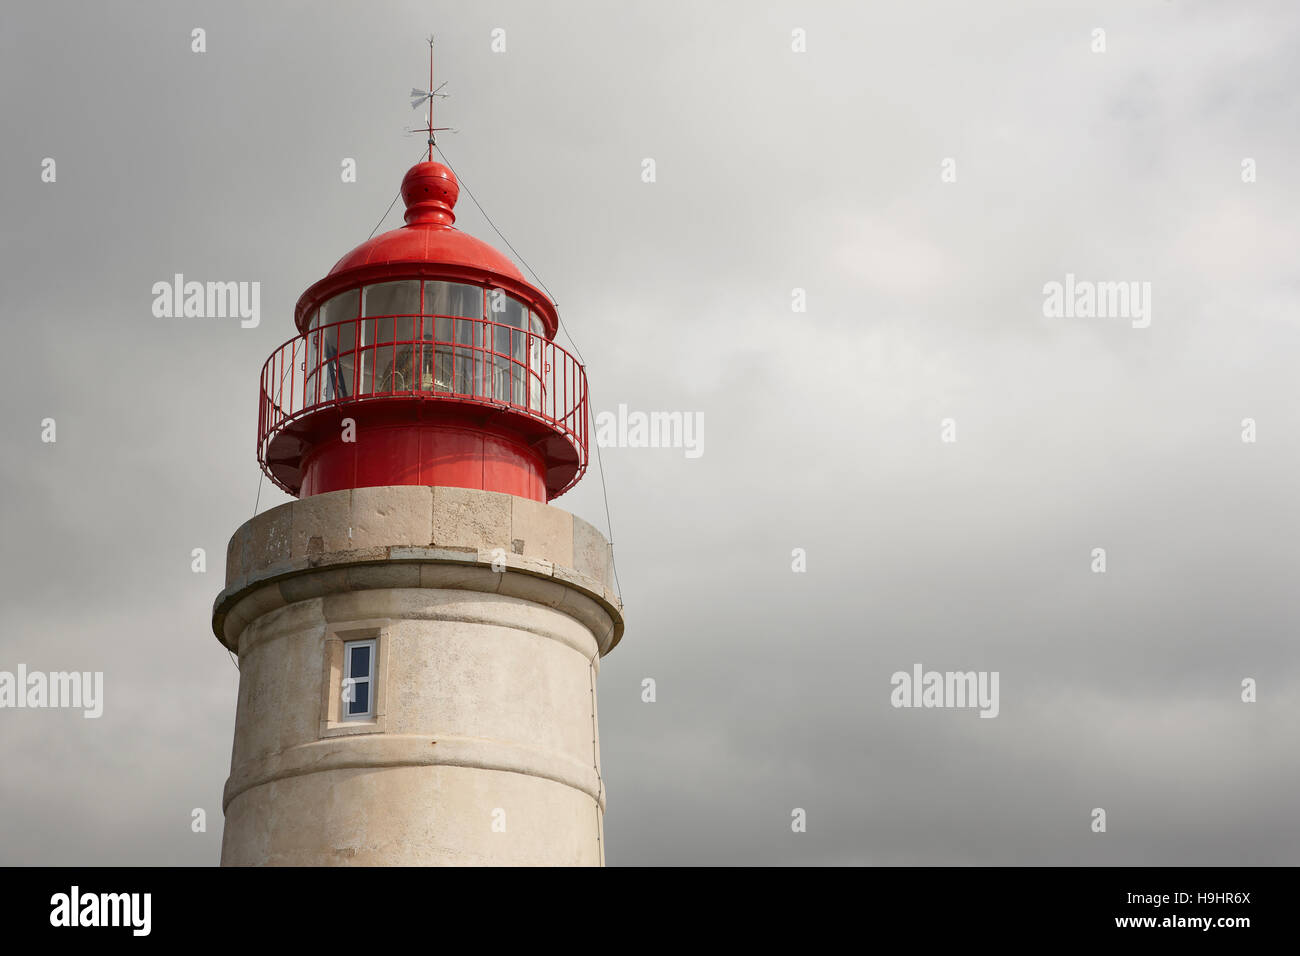 Stone lighthouse with metallic red dome on a cloudy day. Horizontal Stock Photo